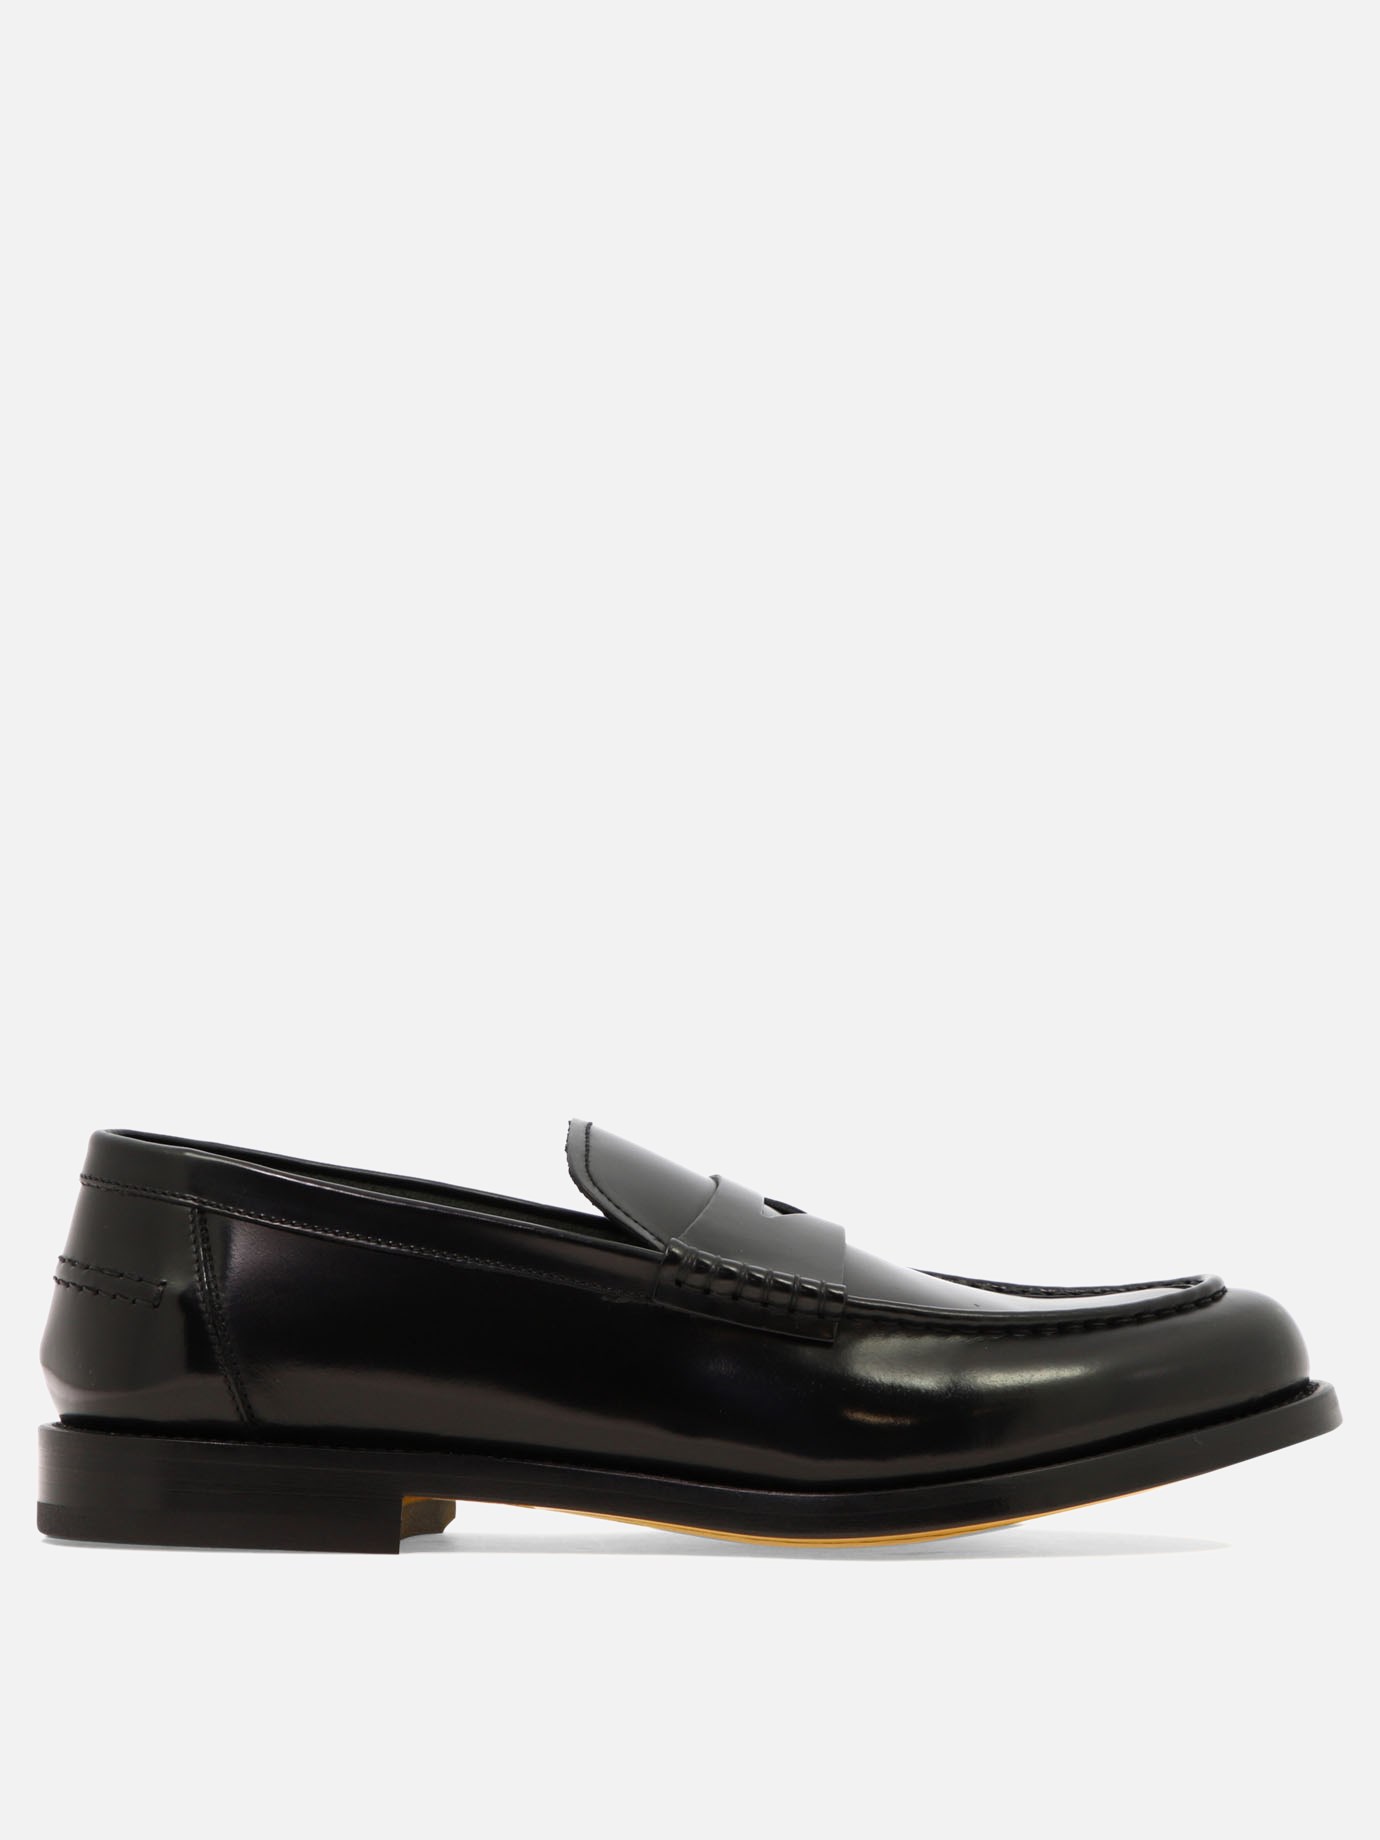  Penny  loafersby Doucal's - 5